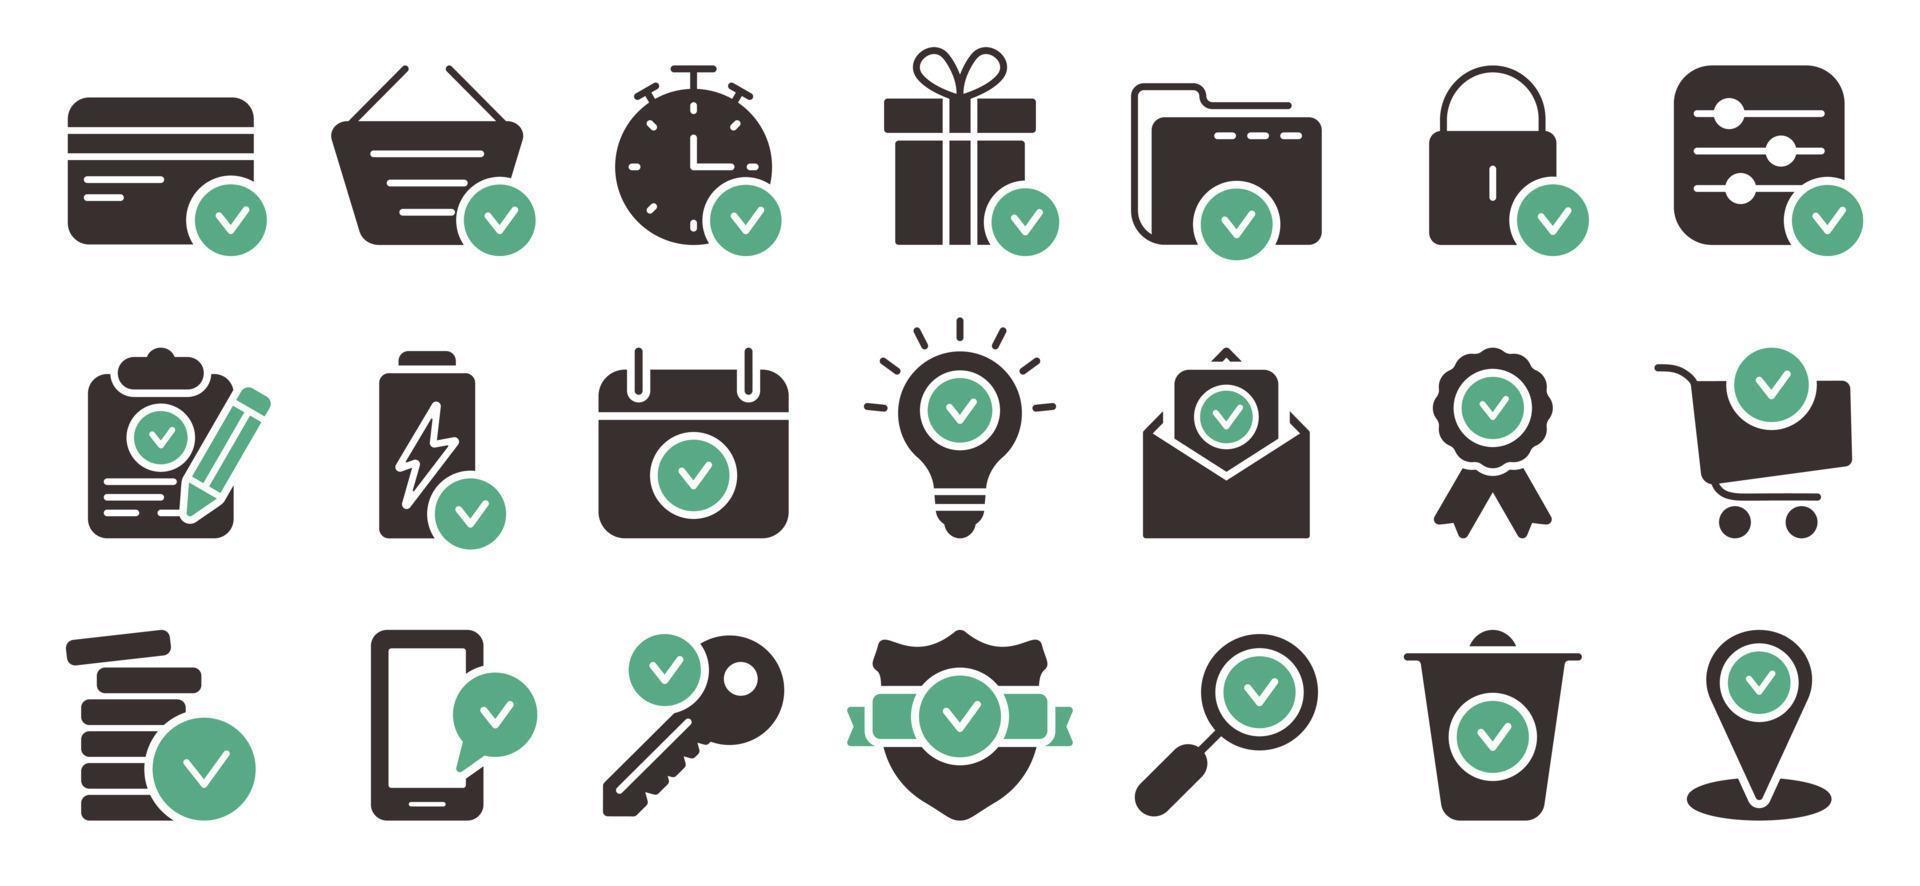 Checkmark Success Good Service Silhouette Icon Set. Confirmed Check Mark Quality Approved Stamp Glyph Pictogram. Guarantee Seal Icon Award Symbol. Approval Check Mark. Isolated Vector Illustration.